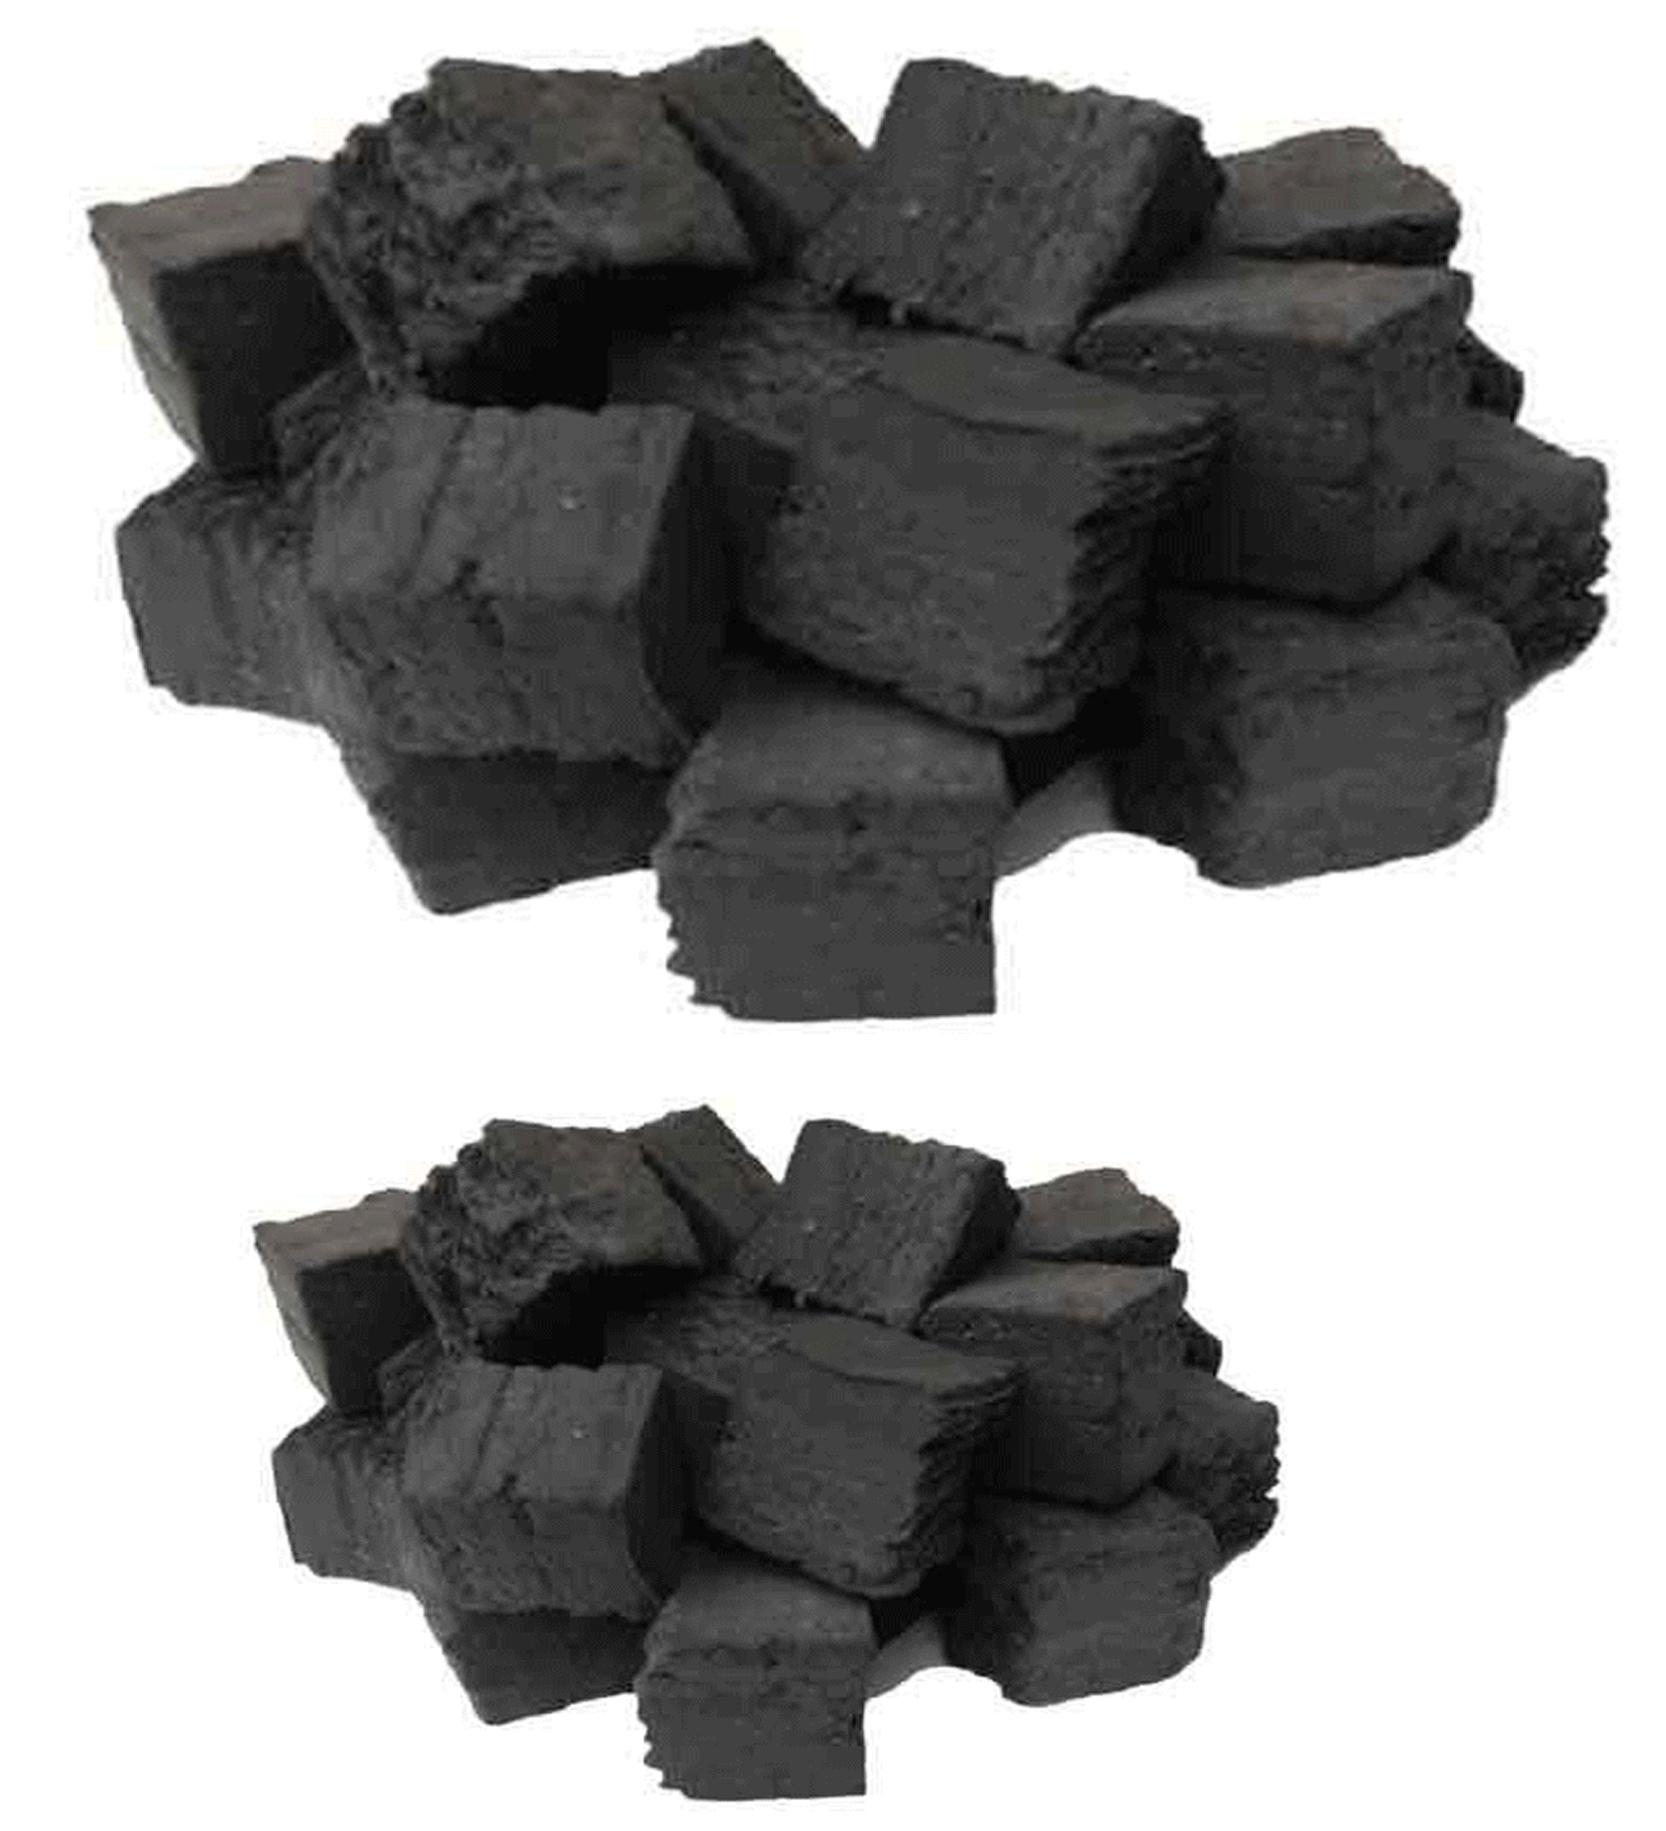 20 New Random Mixed Gas Fire Ceramic Coals Replacement Replacements/Bio Fuels/Ceramic/Boxed In Coals 4 You Packing 